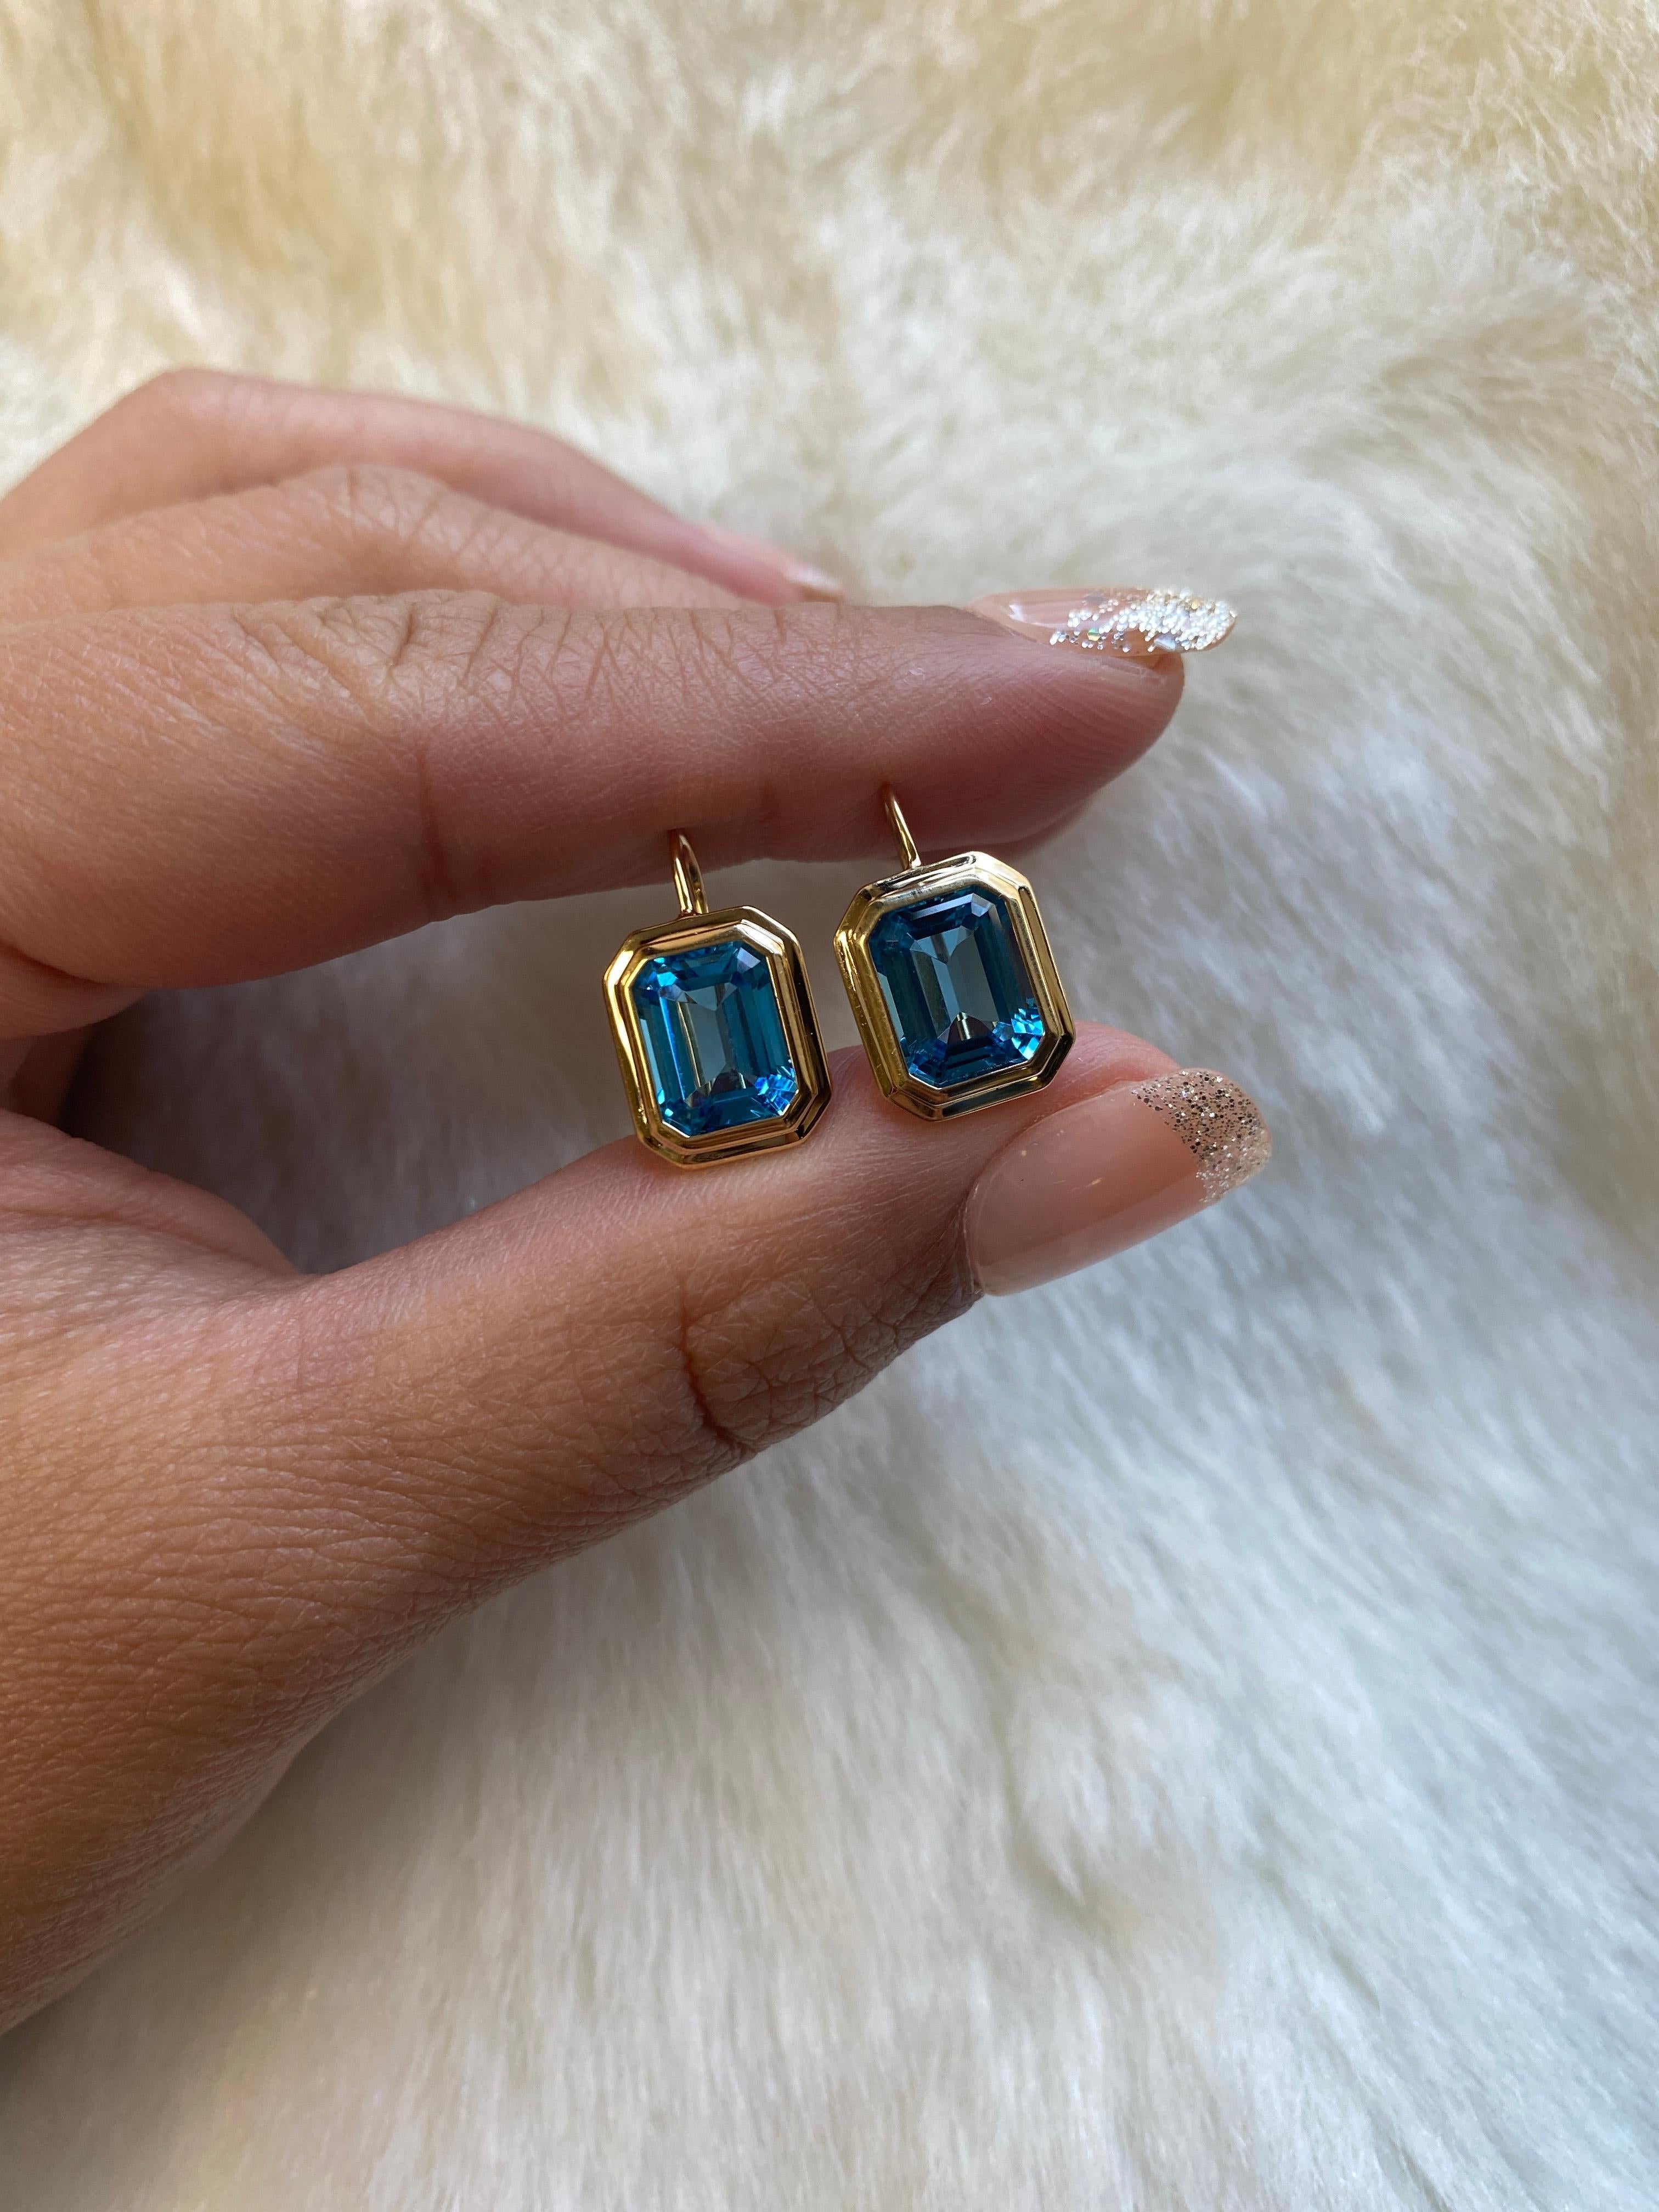 These Blue Topaz Emerald Cut Bezel Set Earrings on Wire in 18K Yellow Gold from the 'Manhattan Collection are a stunning and sophisticated jewelry piece. These earrings feature exquisite blue Topaz gemstones with an elegant emerald cut, cradled in a